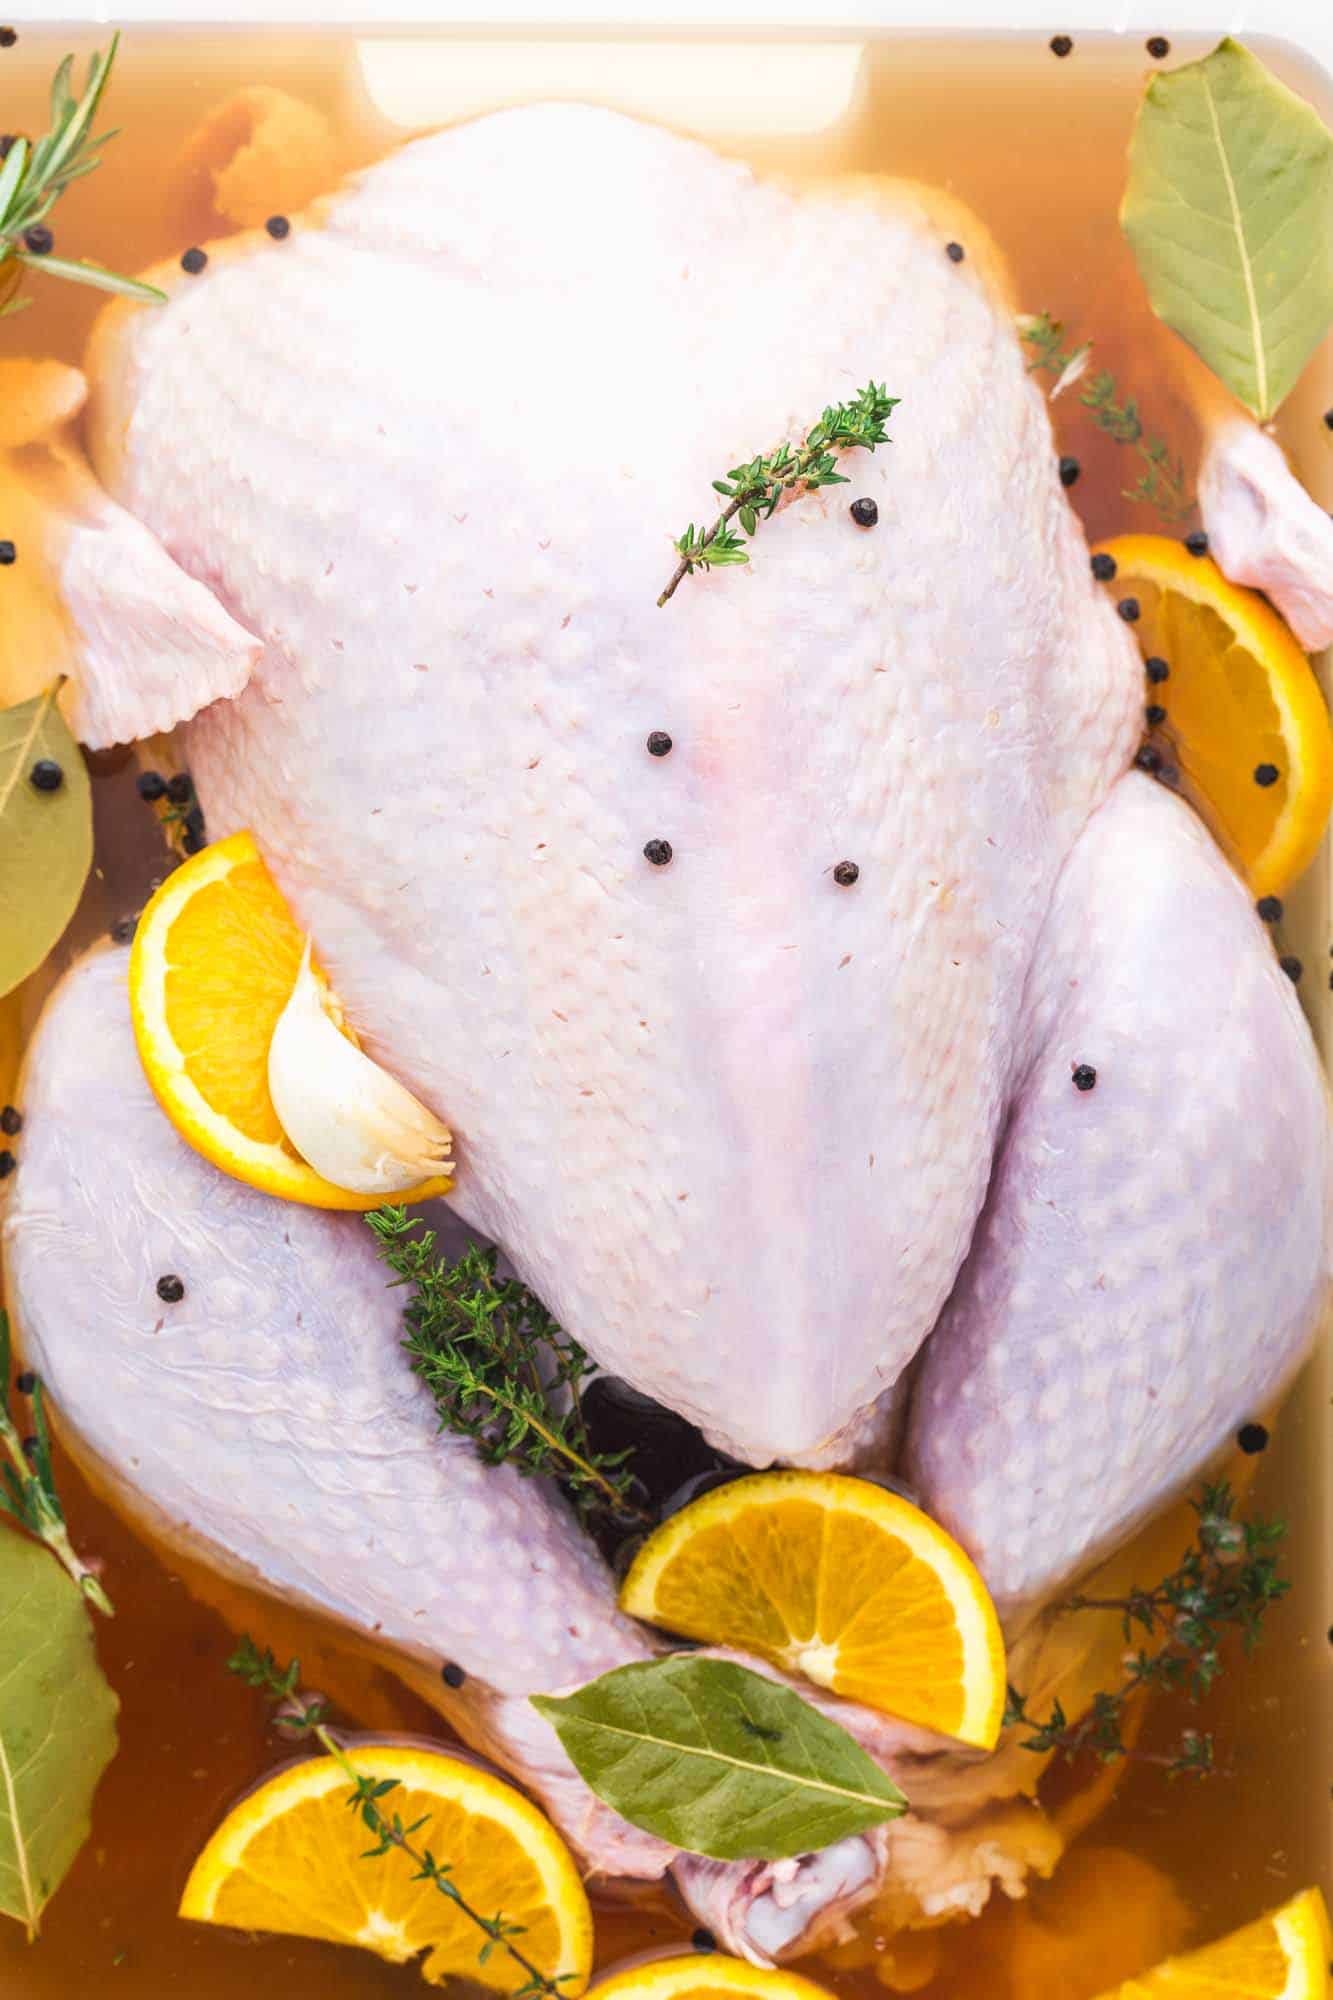 Raw turkey brined in liquid with orange slices, fresh herbs, and peppercorns.